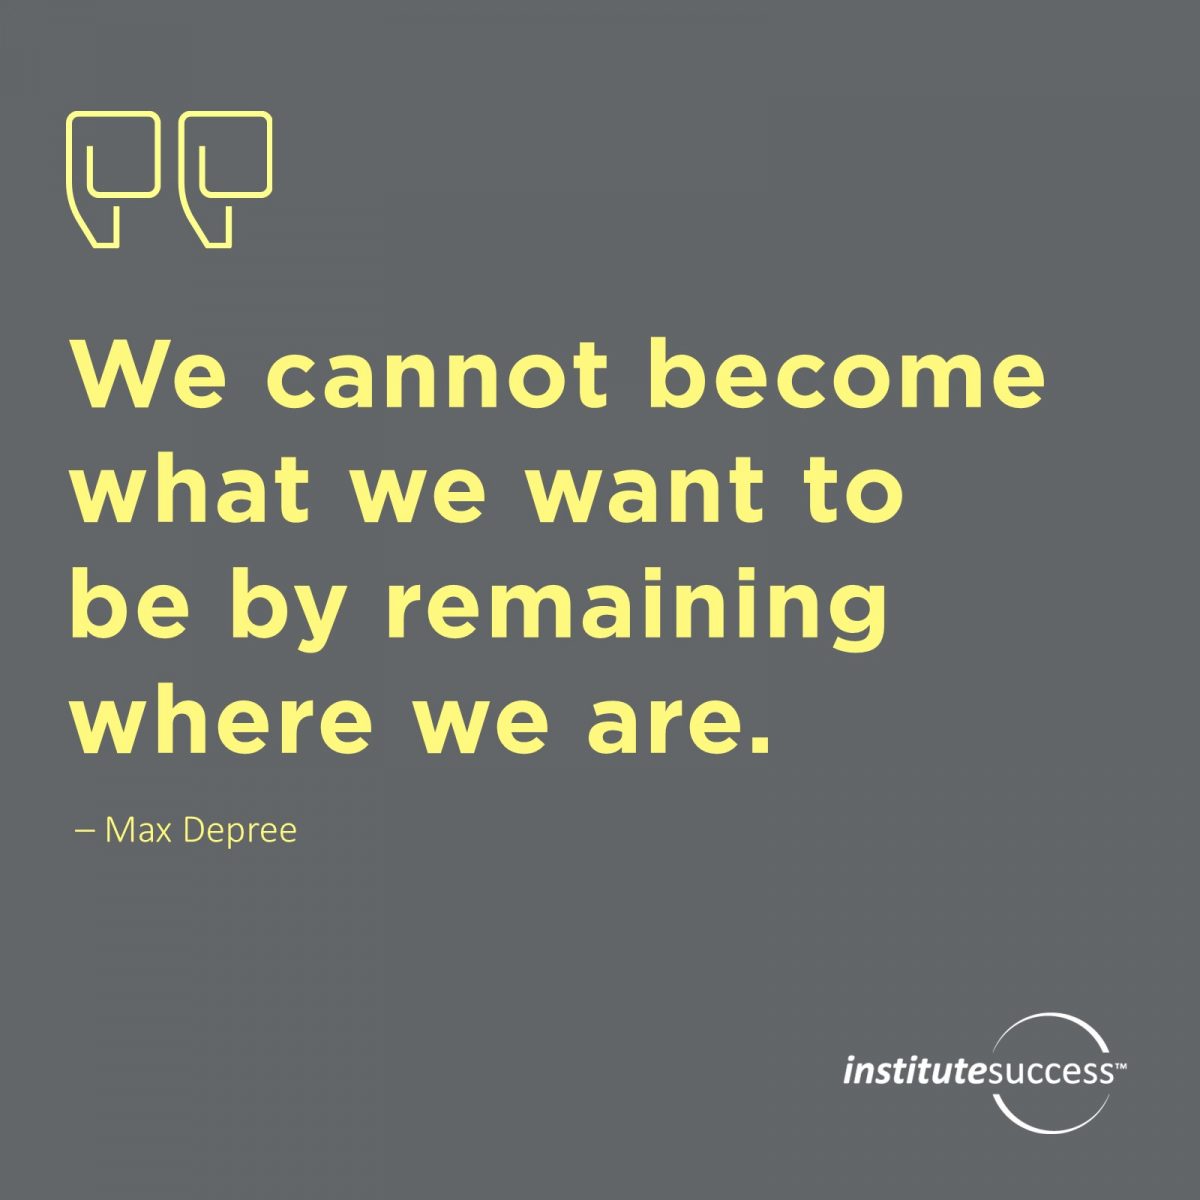 We cannot become what we want to be by remaining where we are – Max Depree